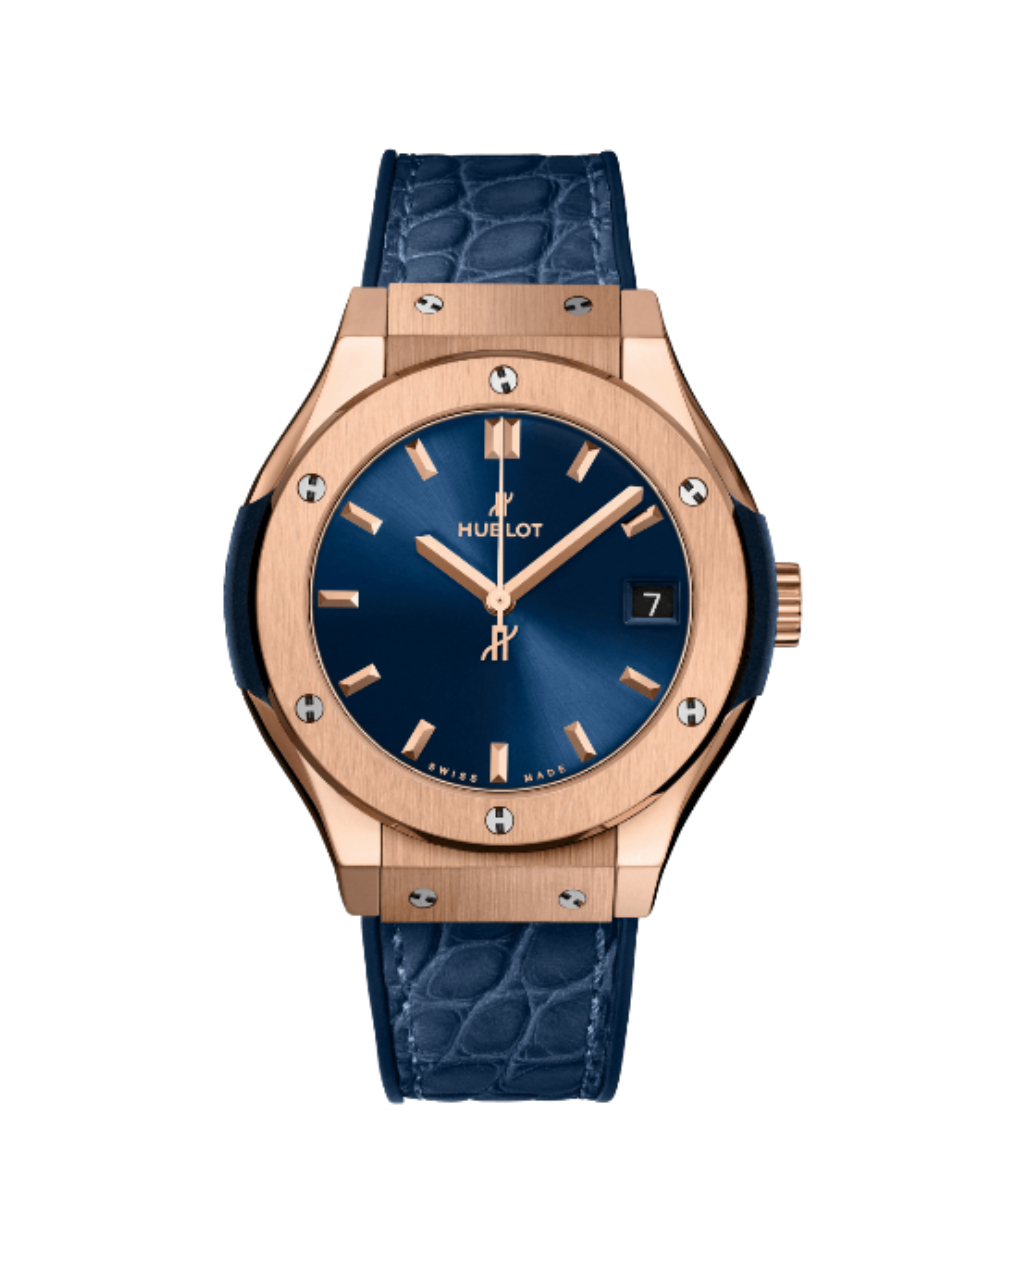 Classic Fusion King Gold Blue 33mm 581.OX.7180.LR